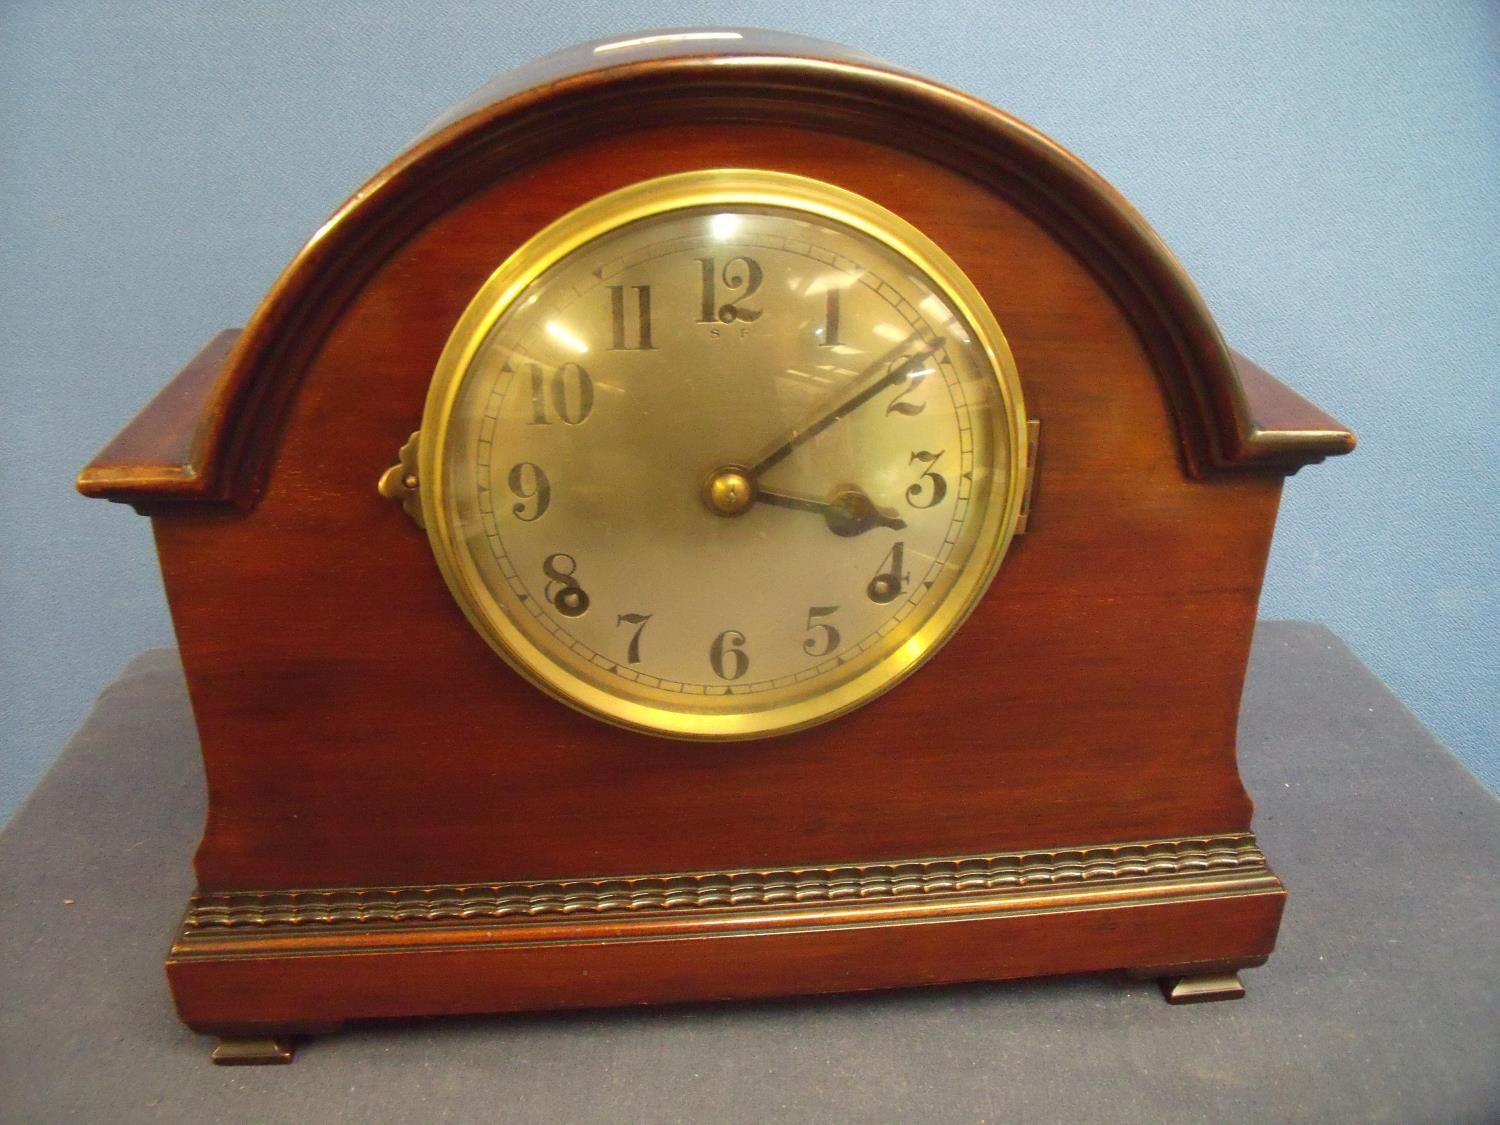 Early 20th C mahogany cased arched top mantel clock with brass dial and chiming movement